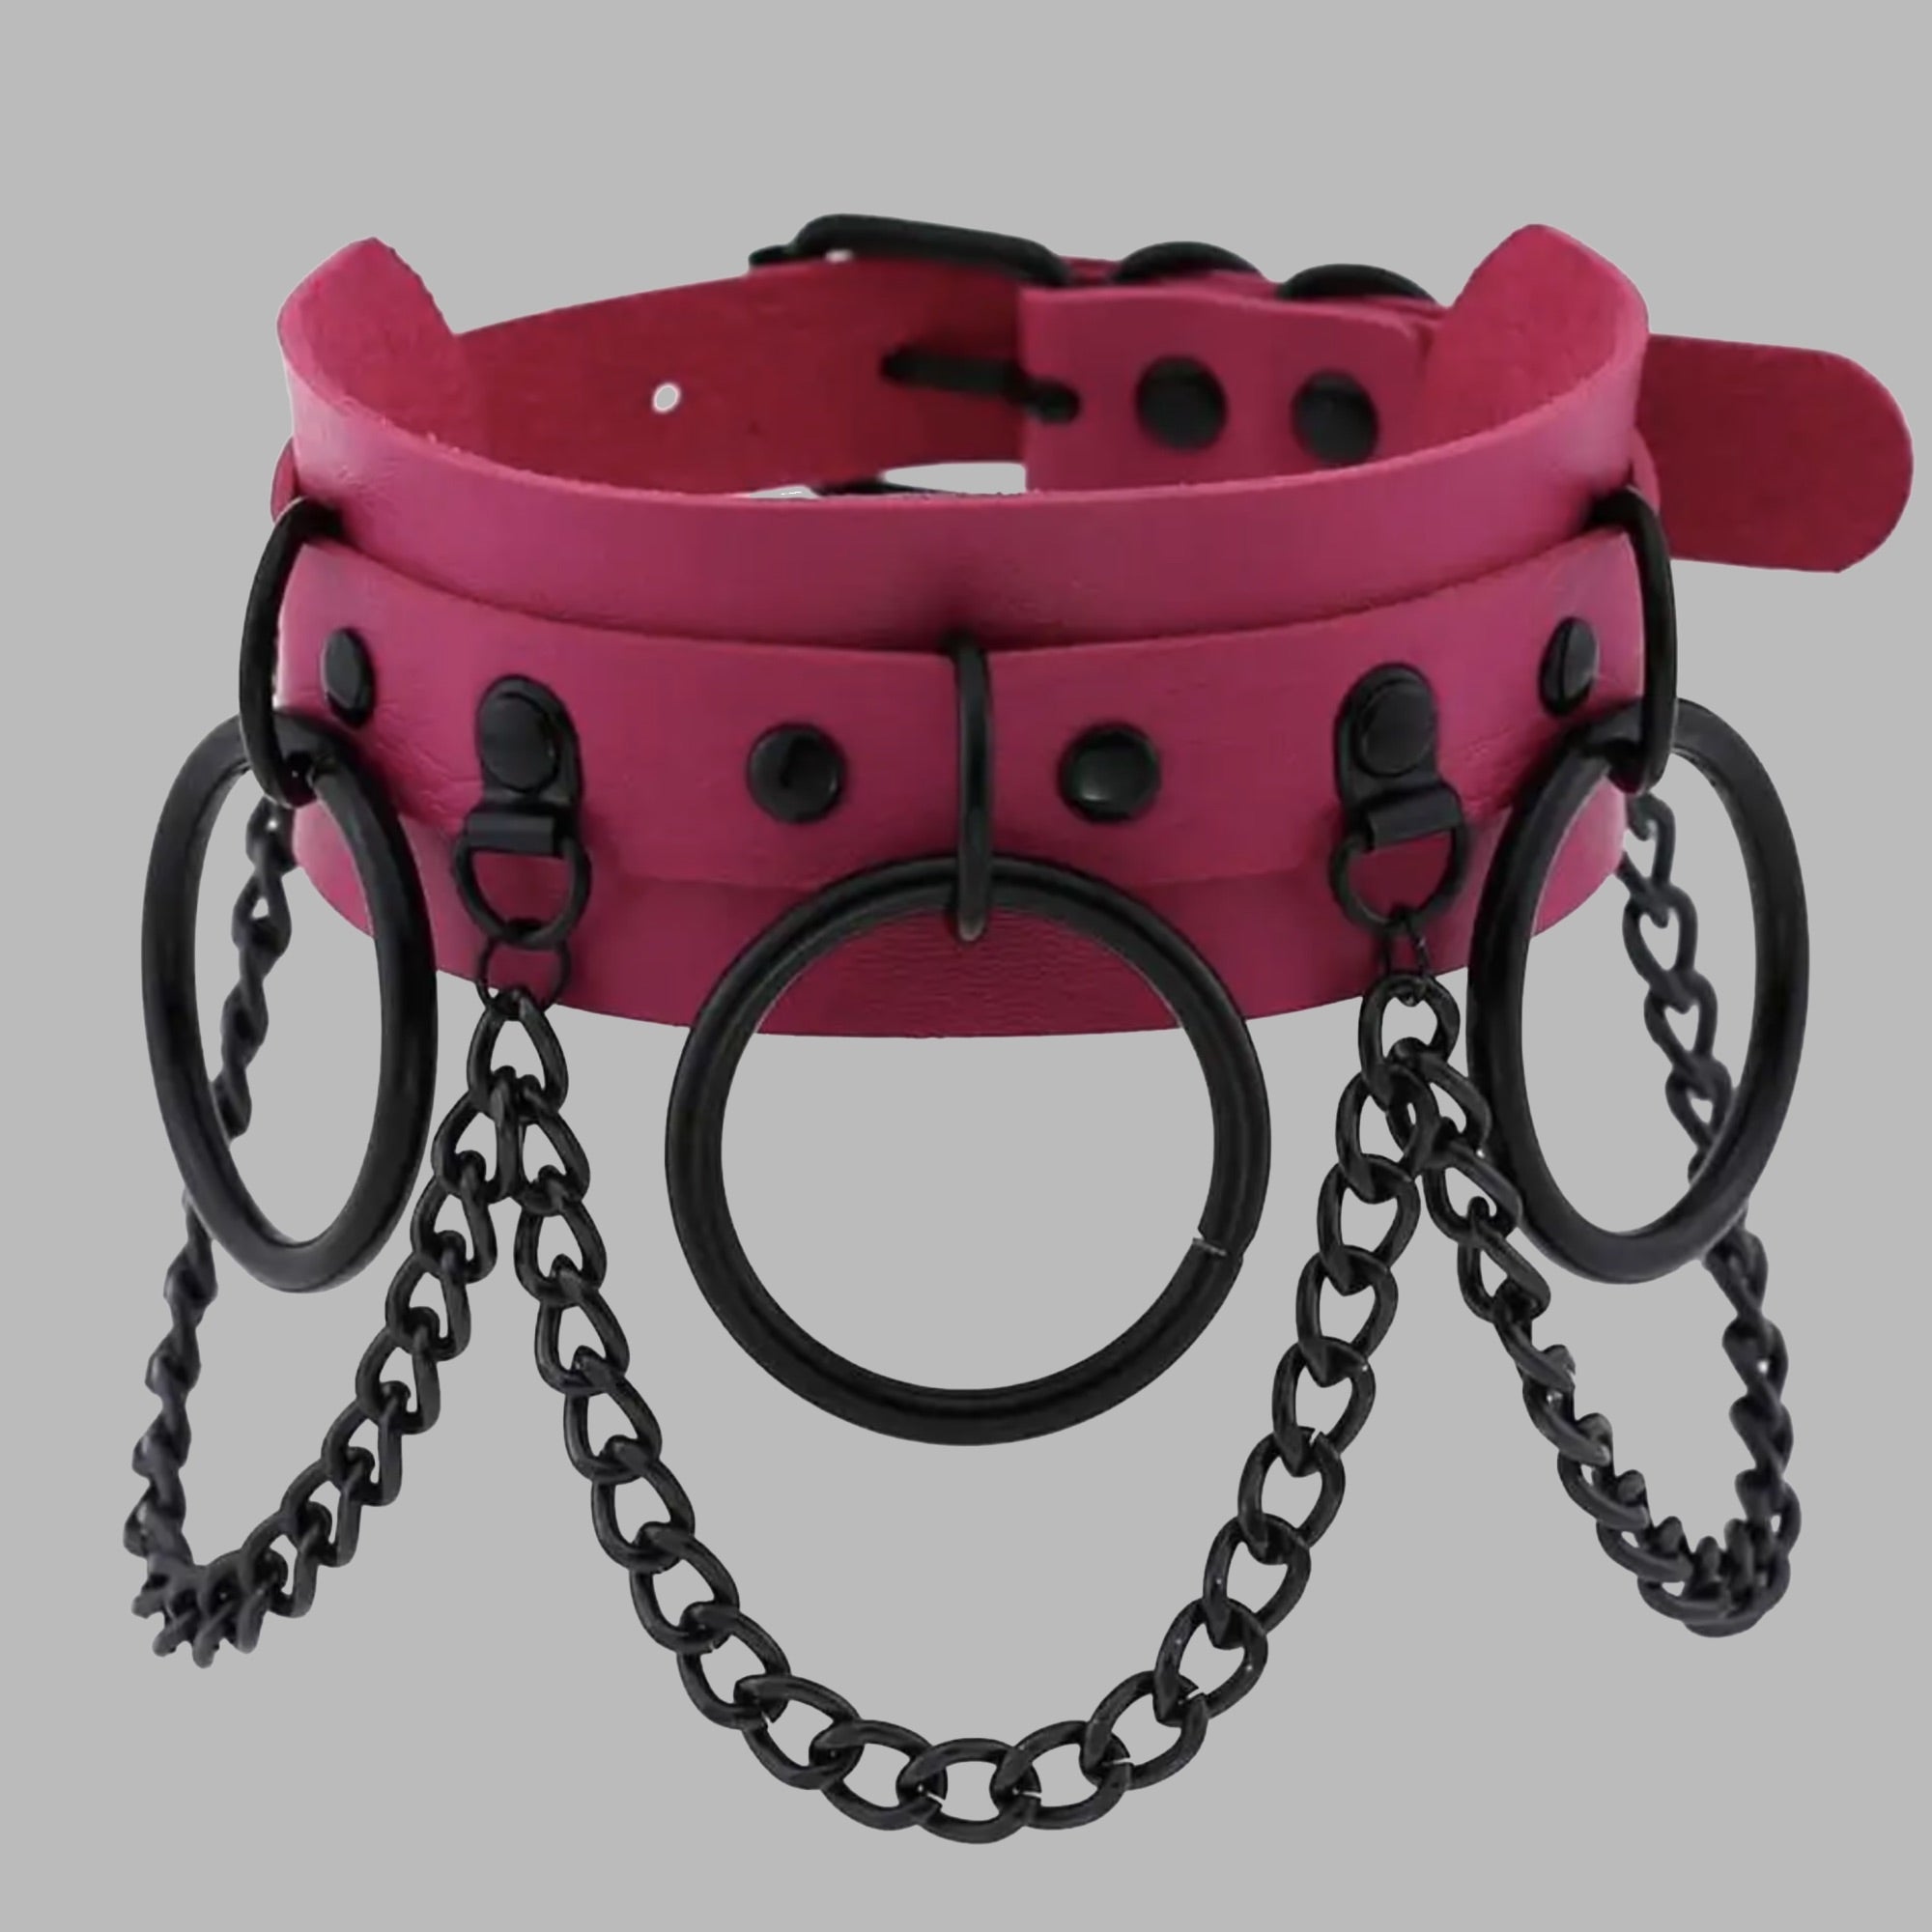 Triple O Ring & Chains Collar - Hot Pink & Black